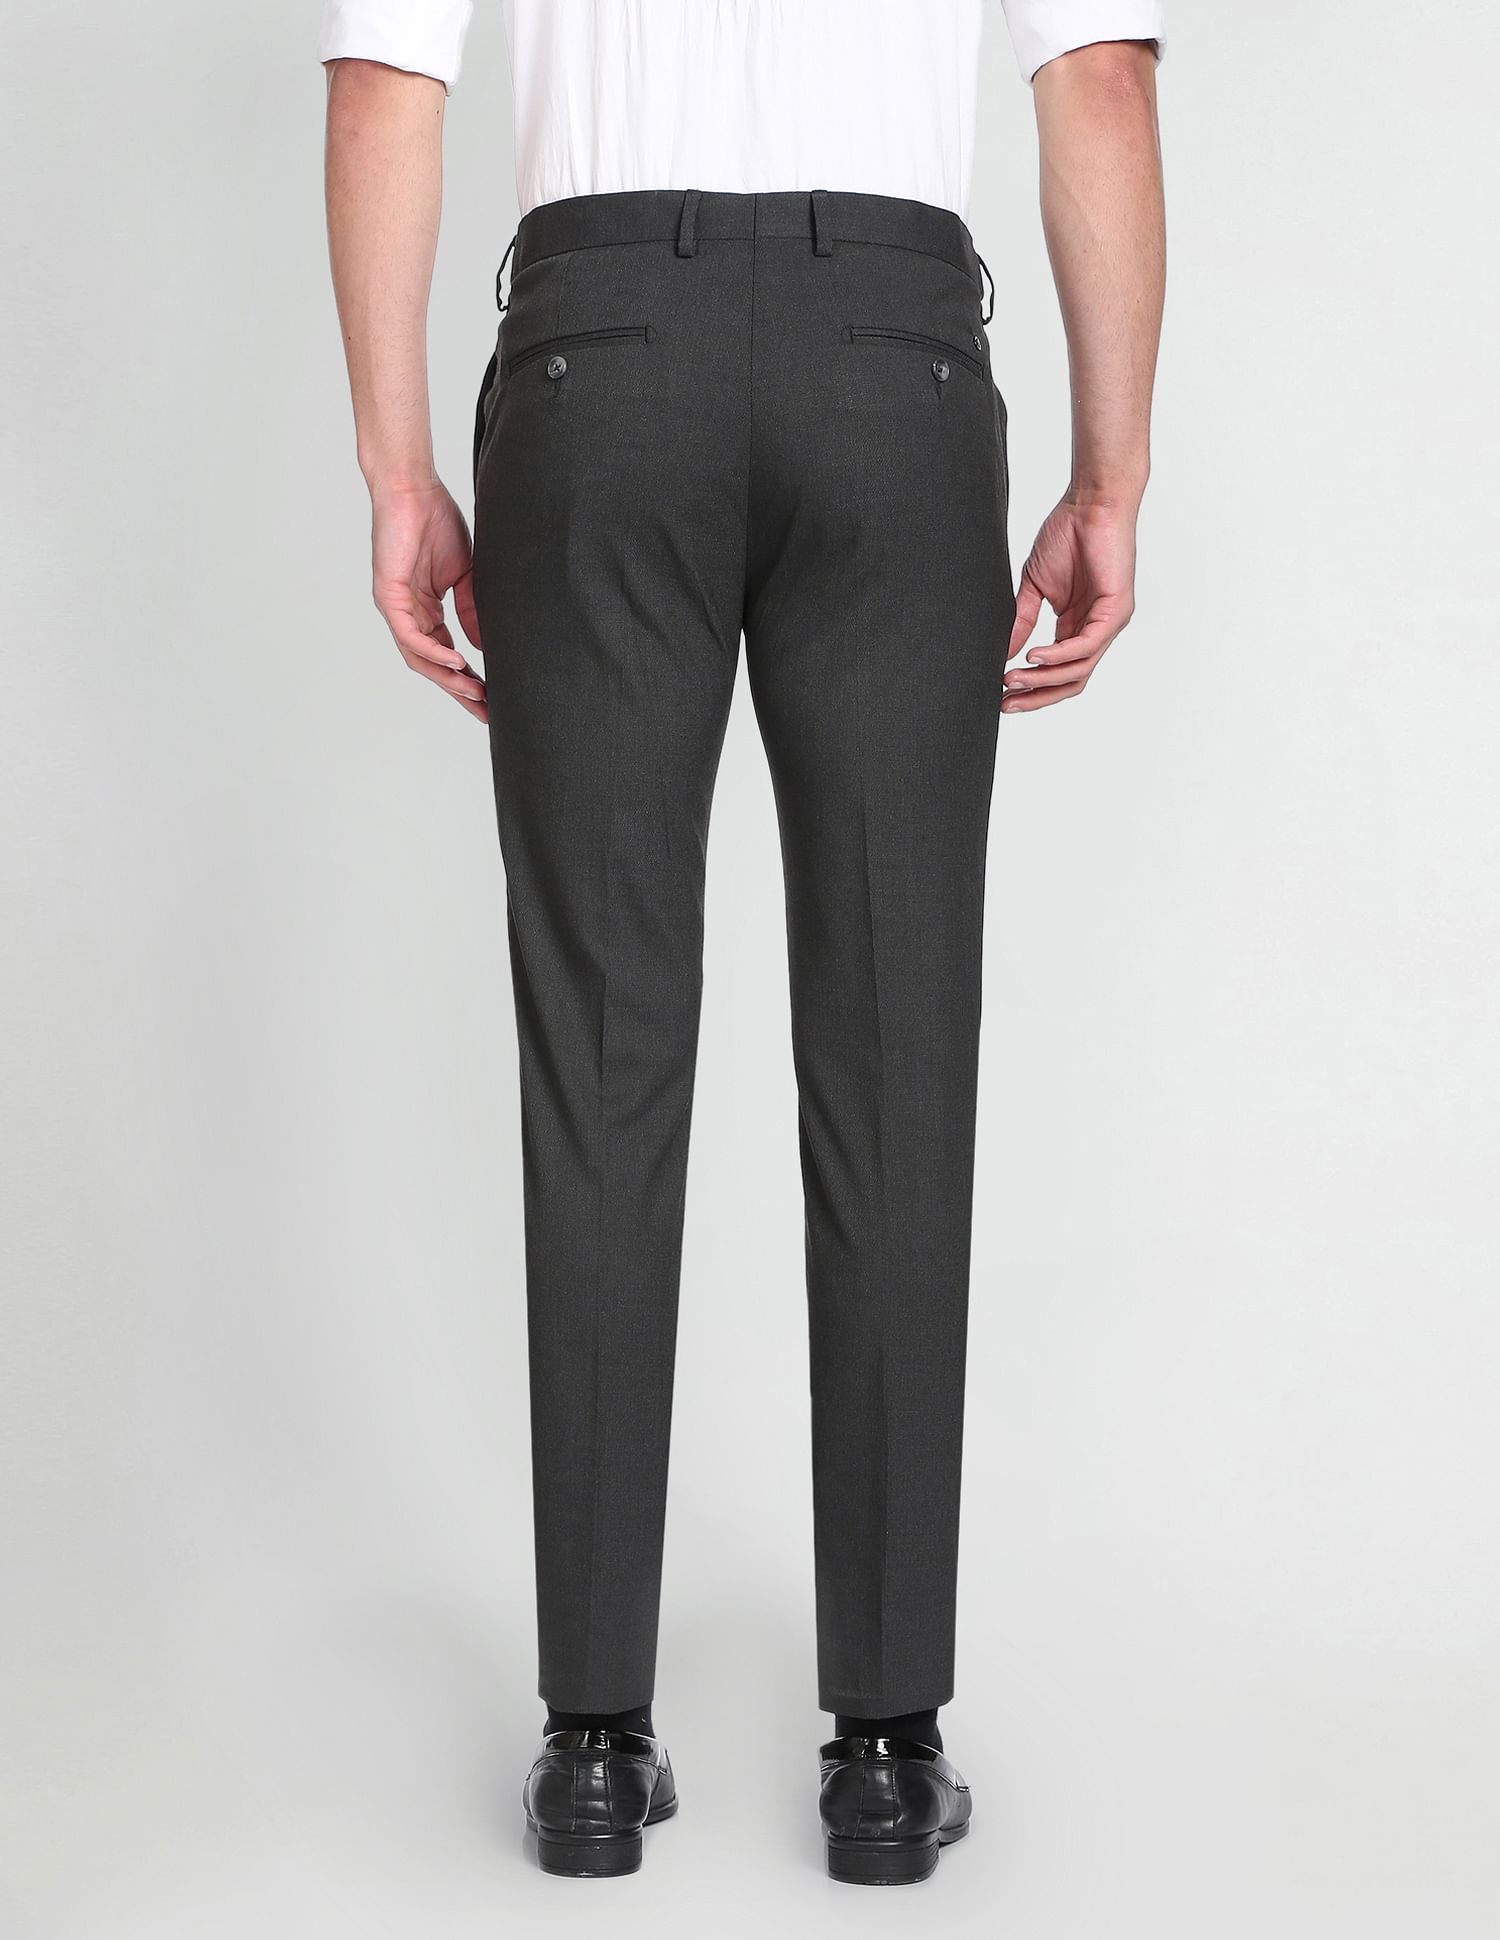 Dobby Tailored Formal Trousers